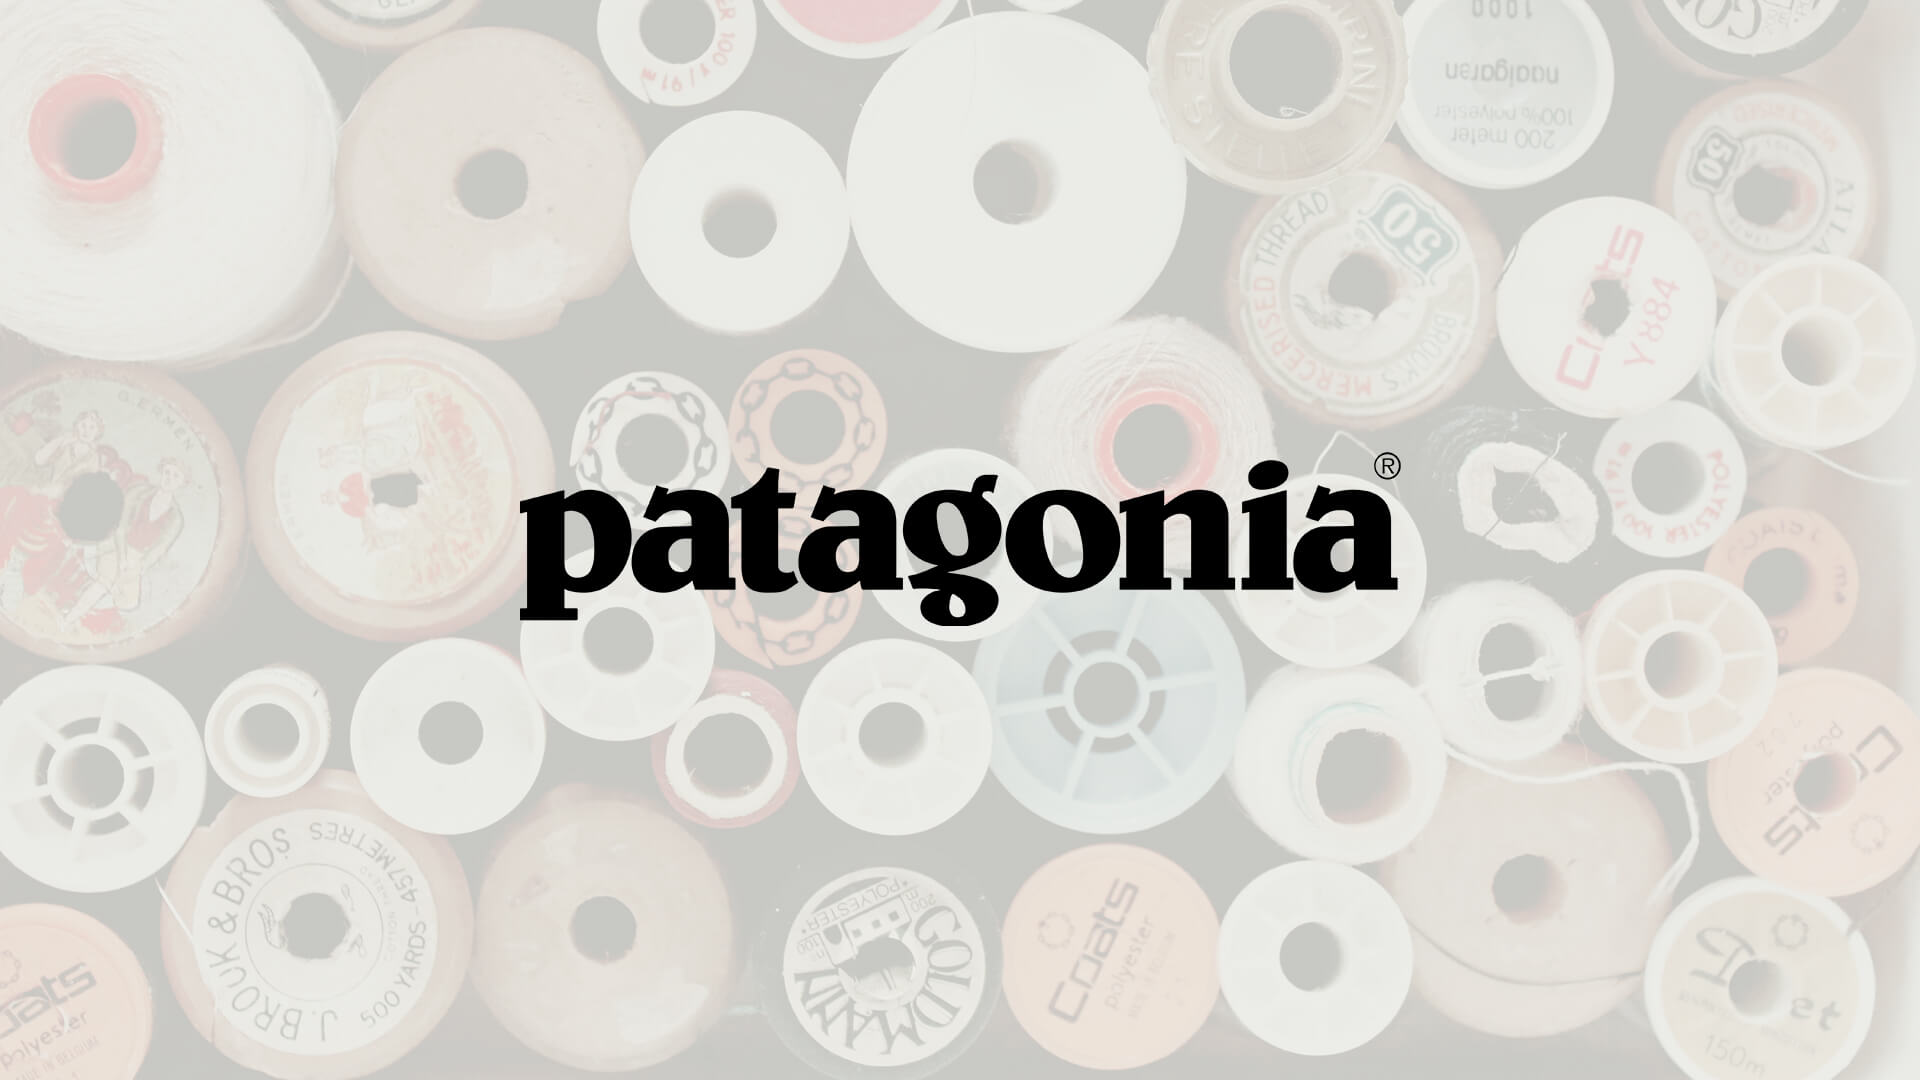 Patagonia - Worn Wear Campaign - Clothing Brand